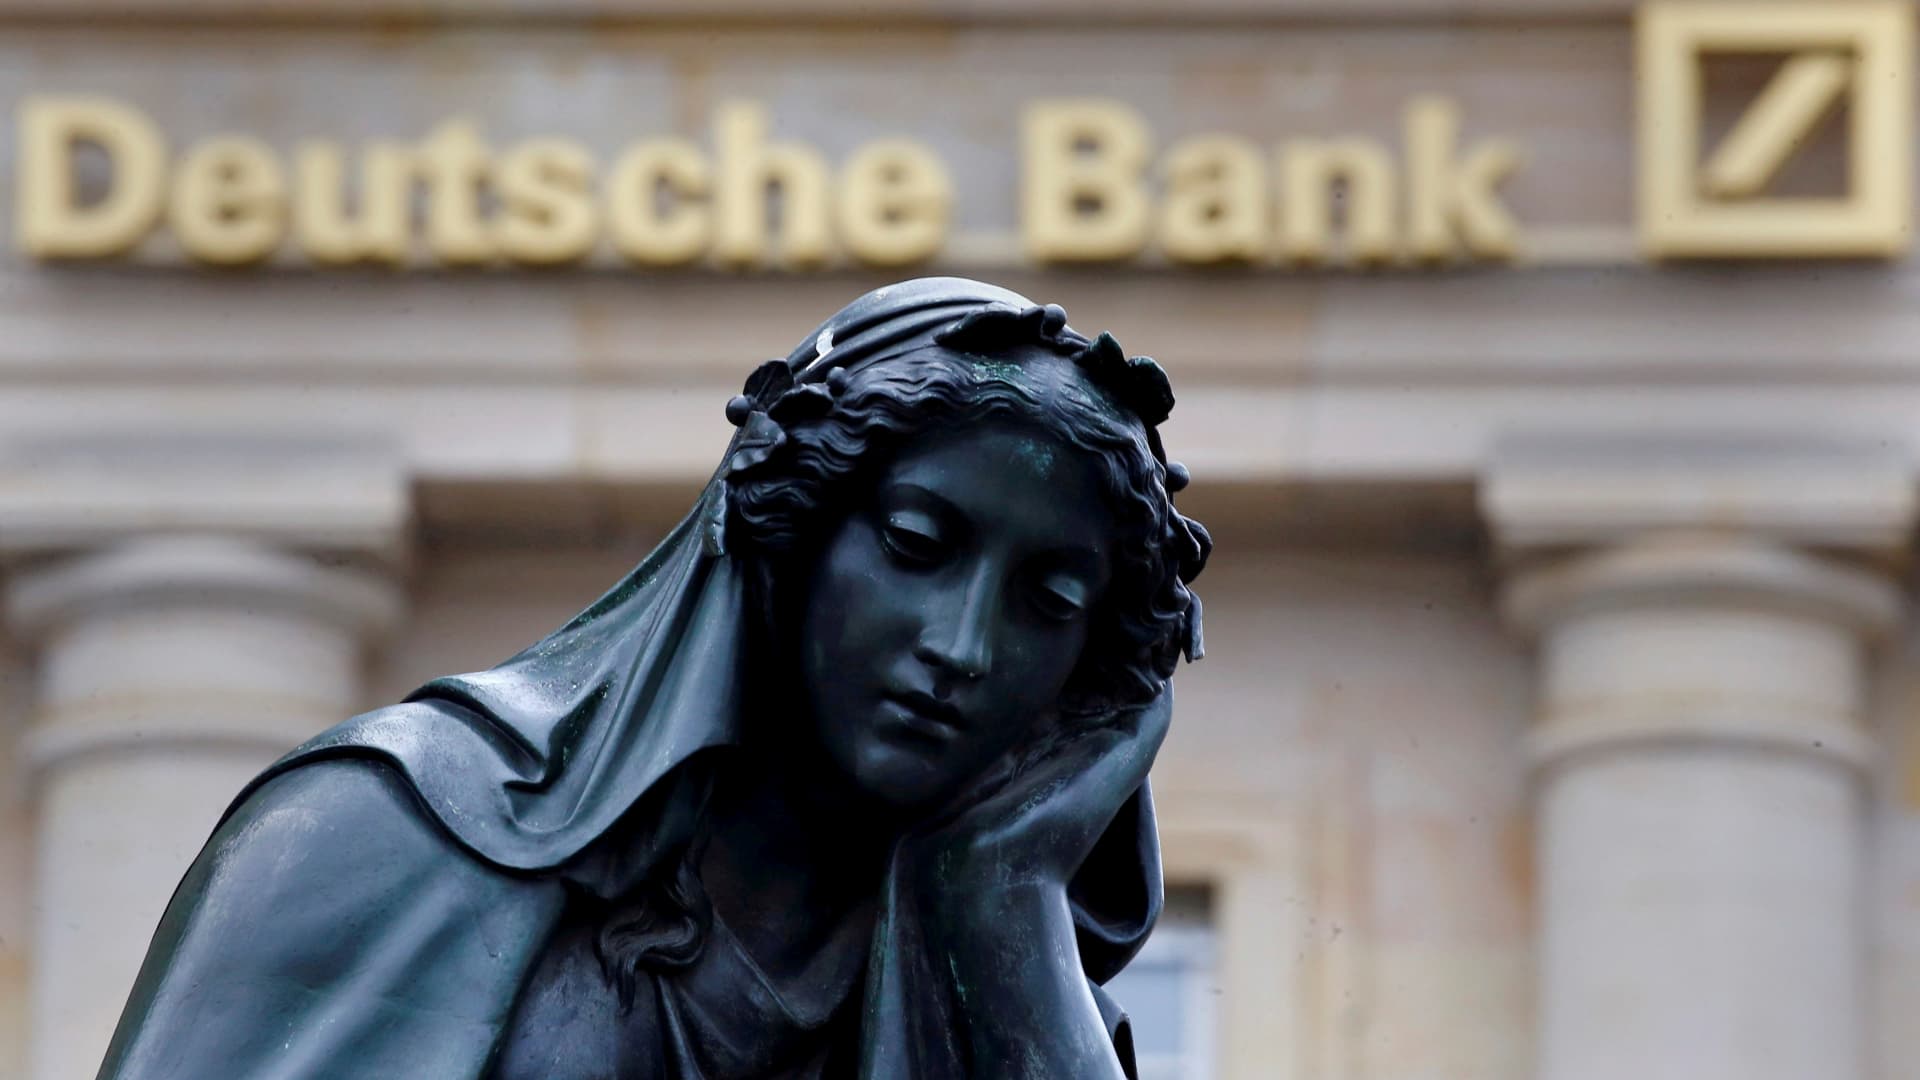 Deutsche Bank shares slide after sudden spike in the cost of insuring against its default